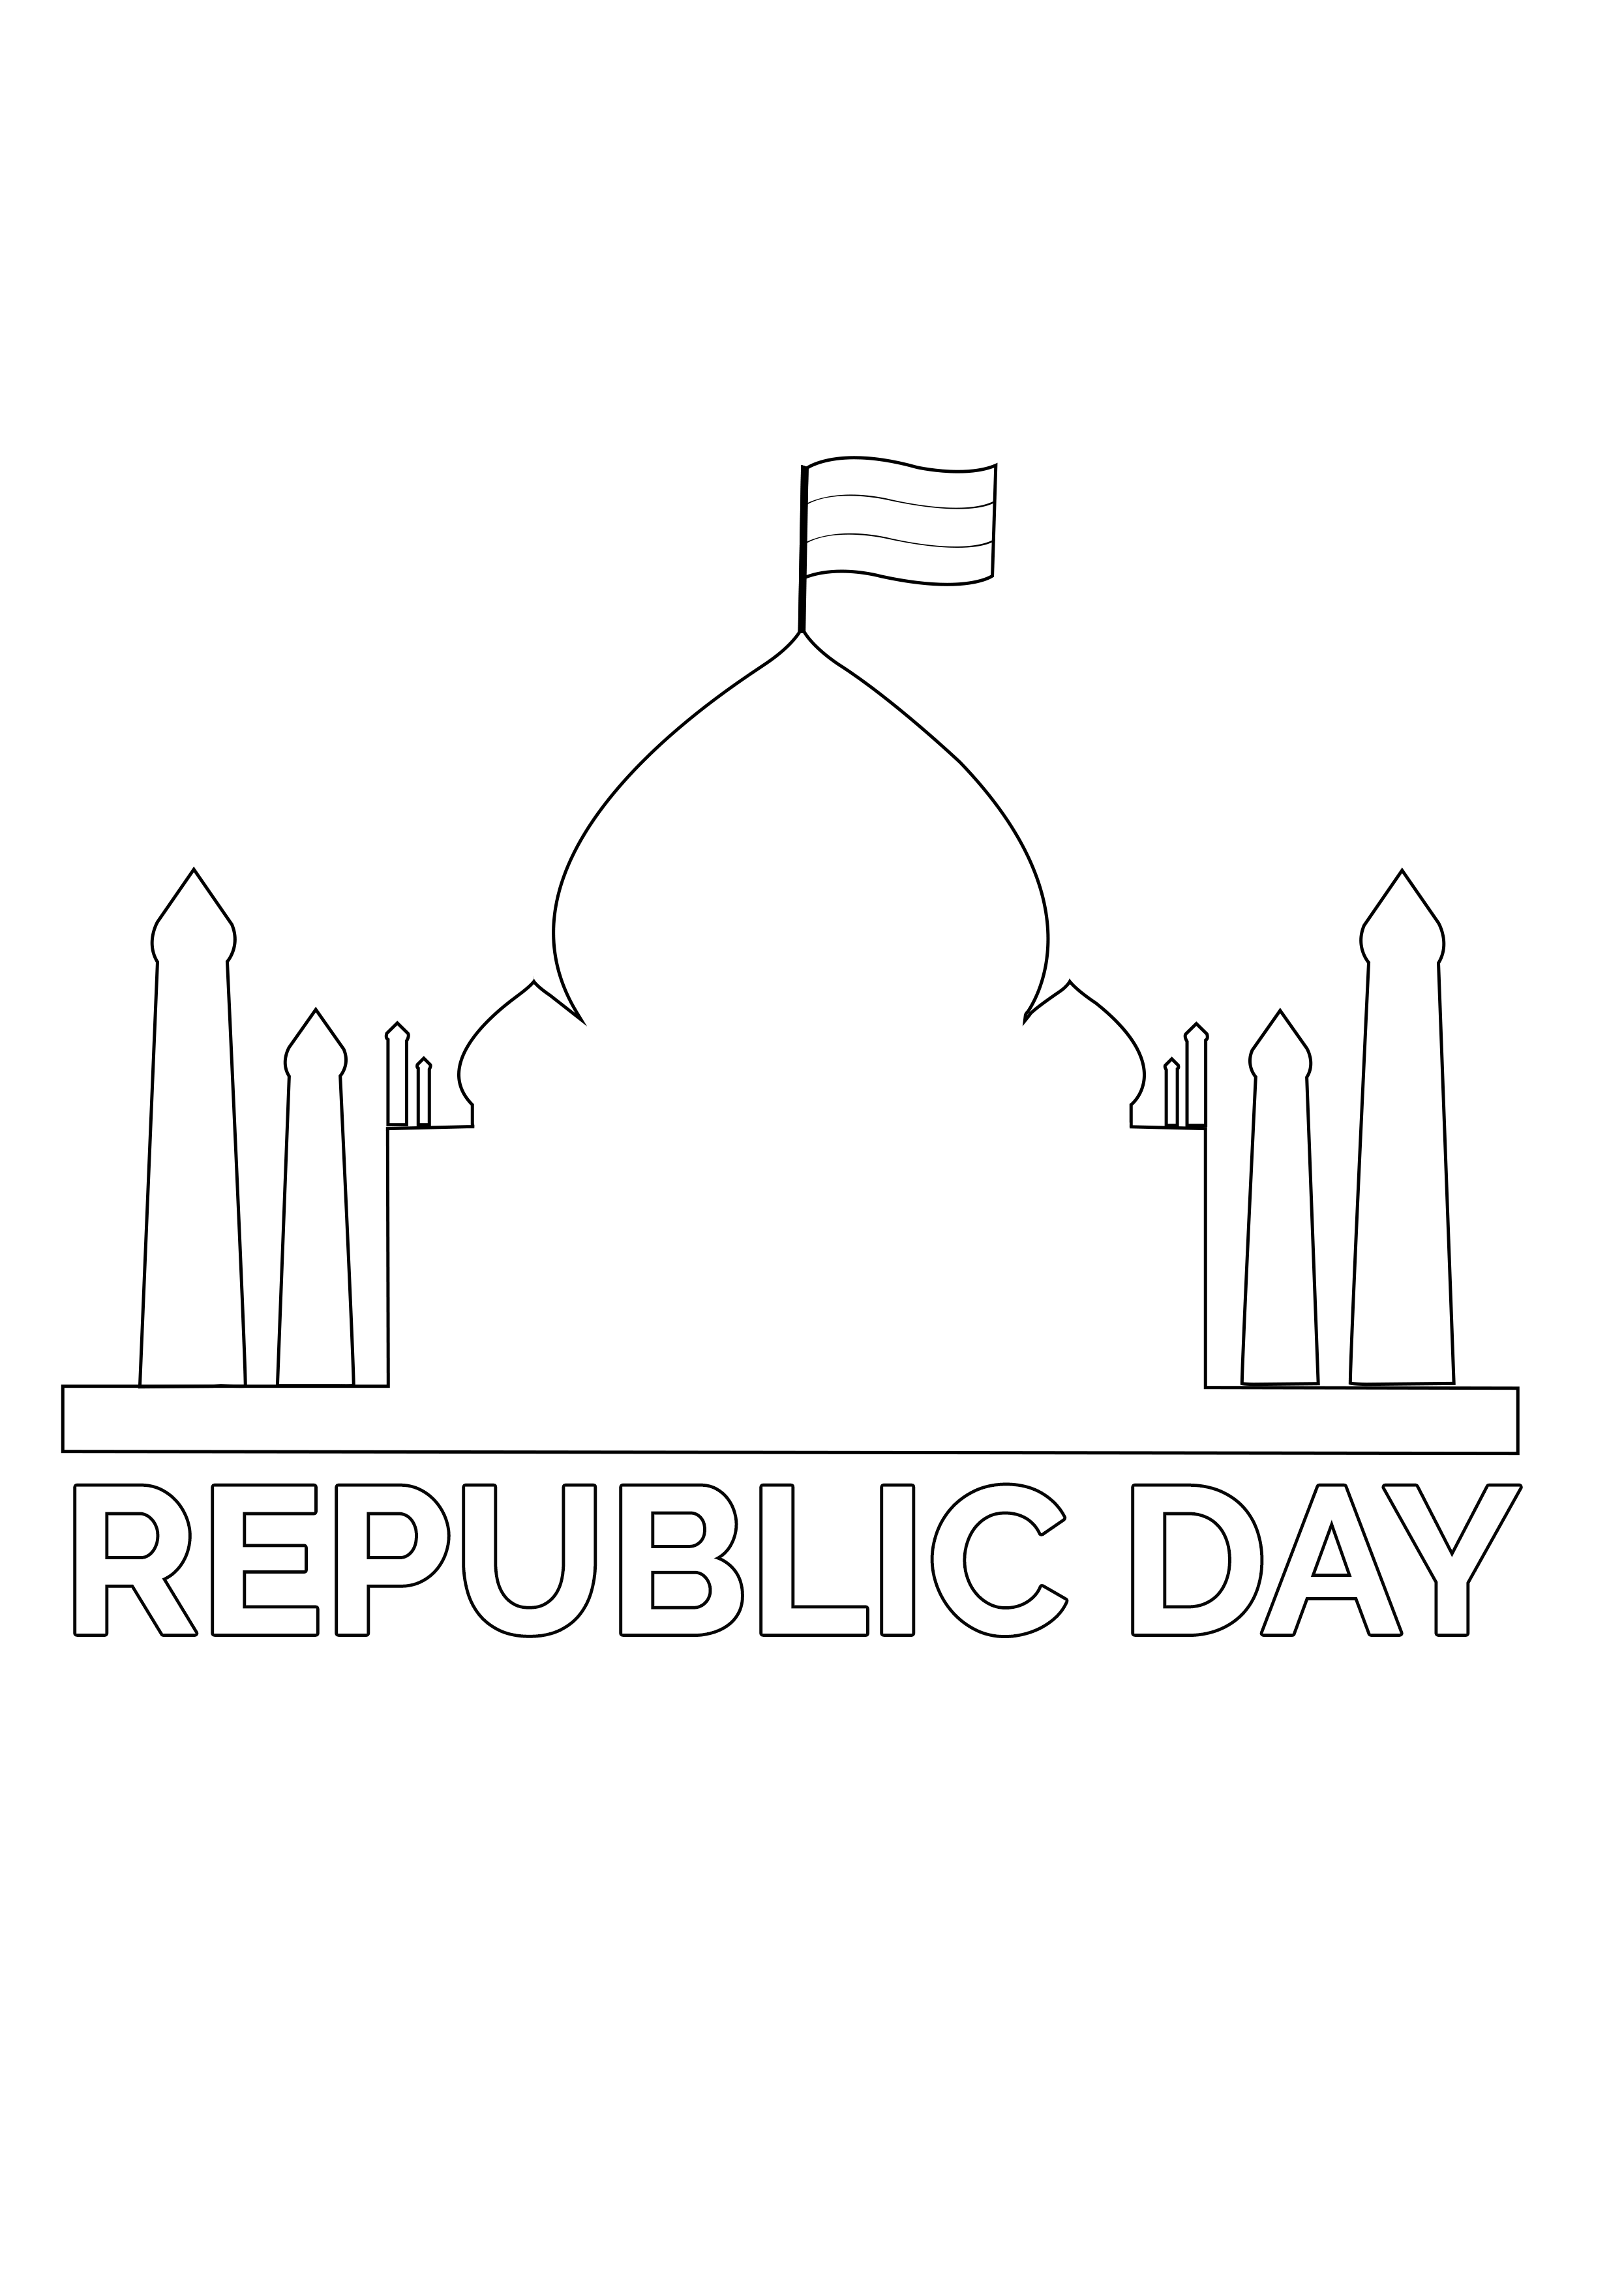 republic day drawing easy and beautiful - YouTube